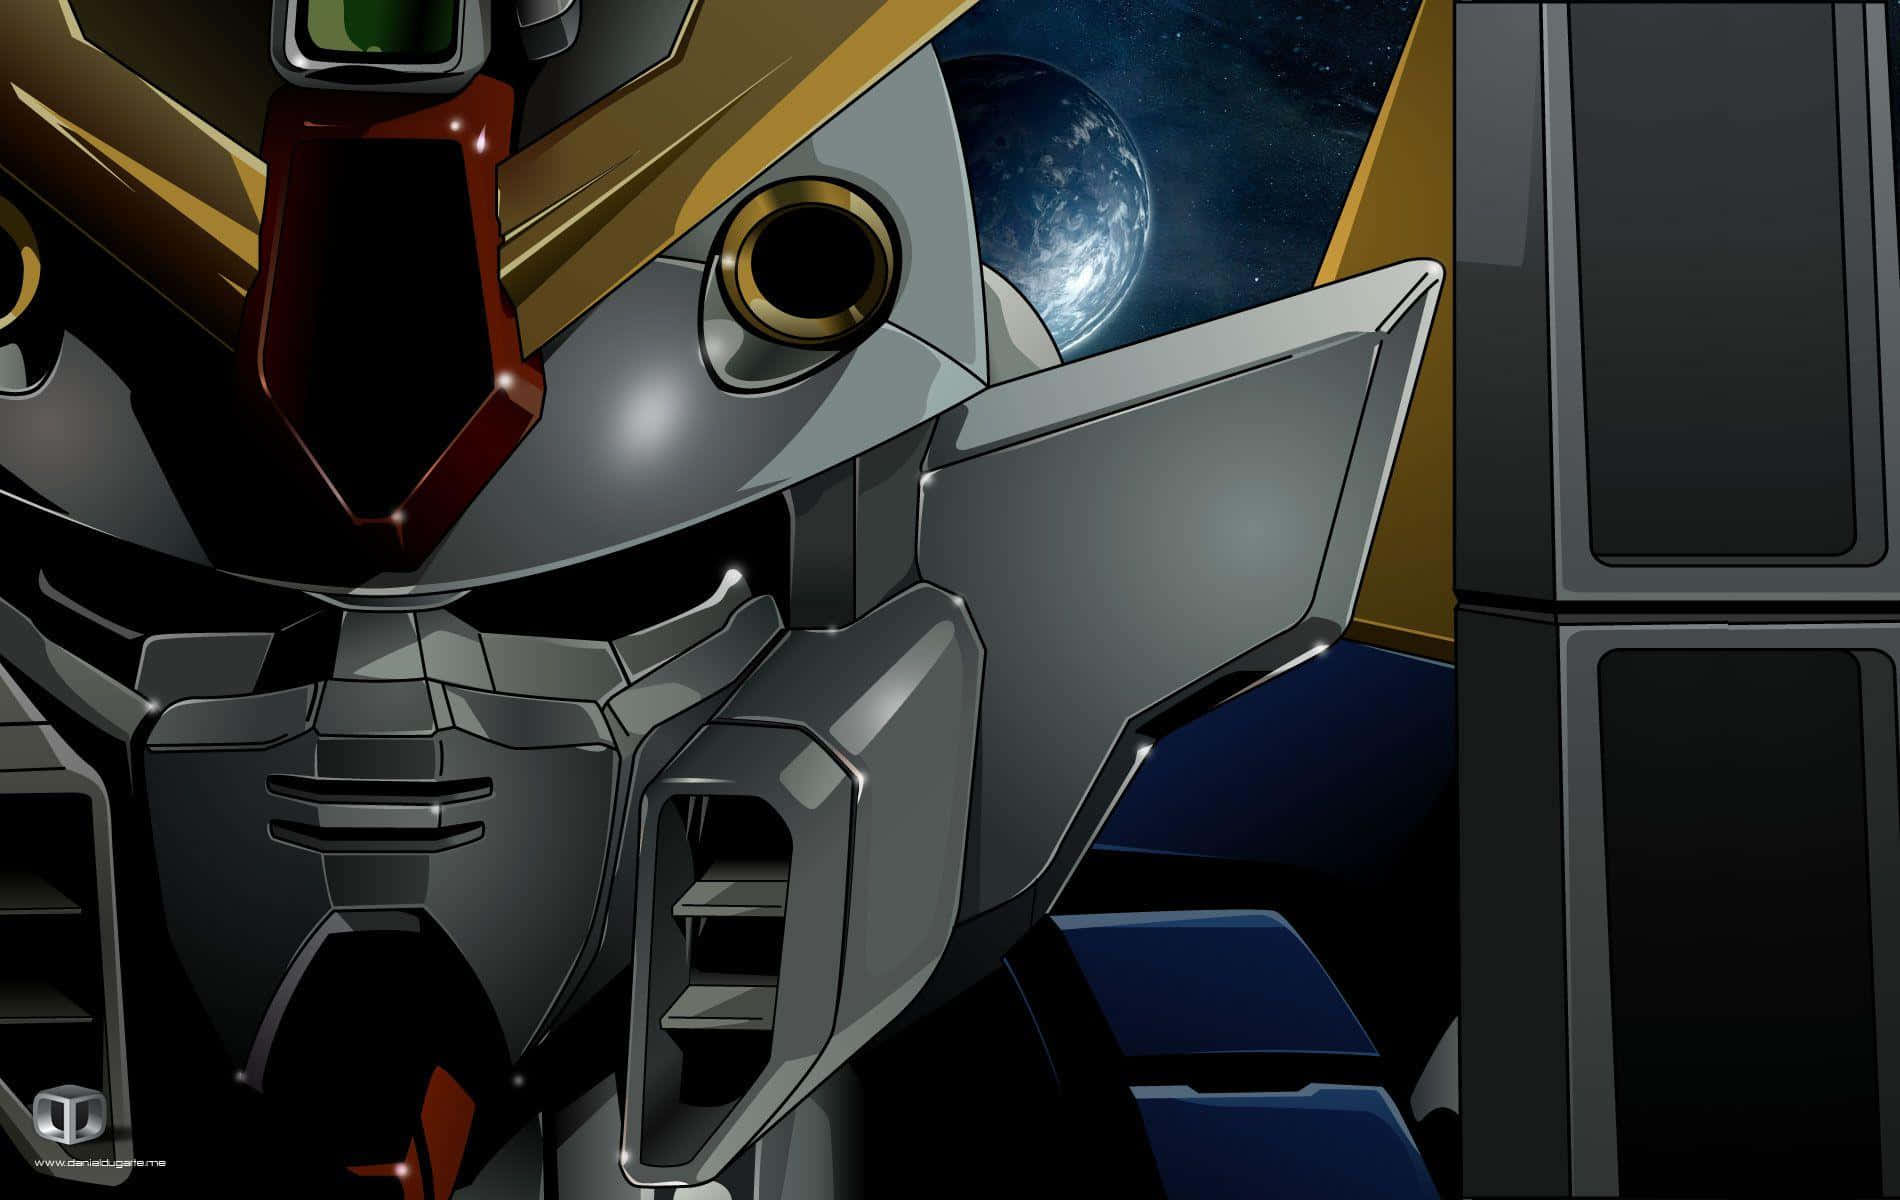 Watch in awe as the legendary Gundam warrior takes on forces of destruction and evil. Wallpaper